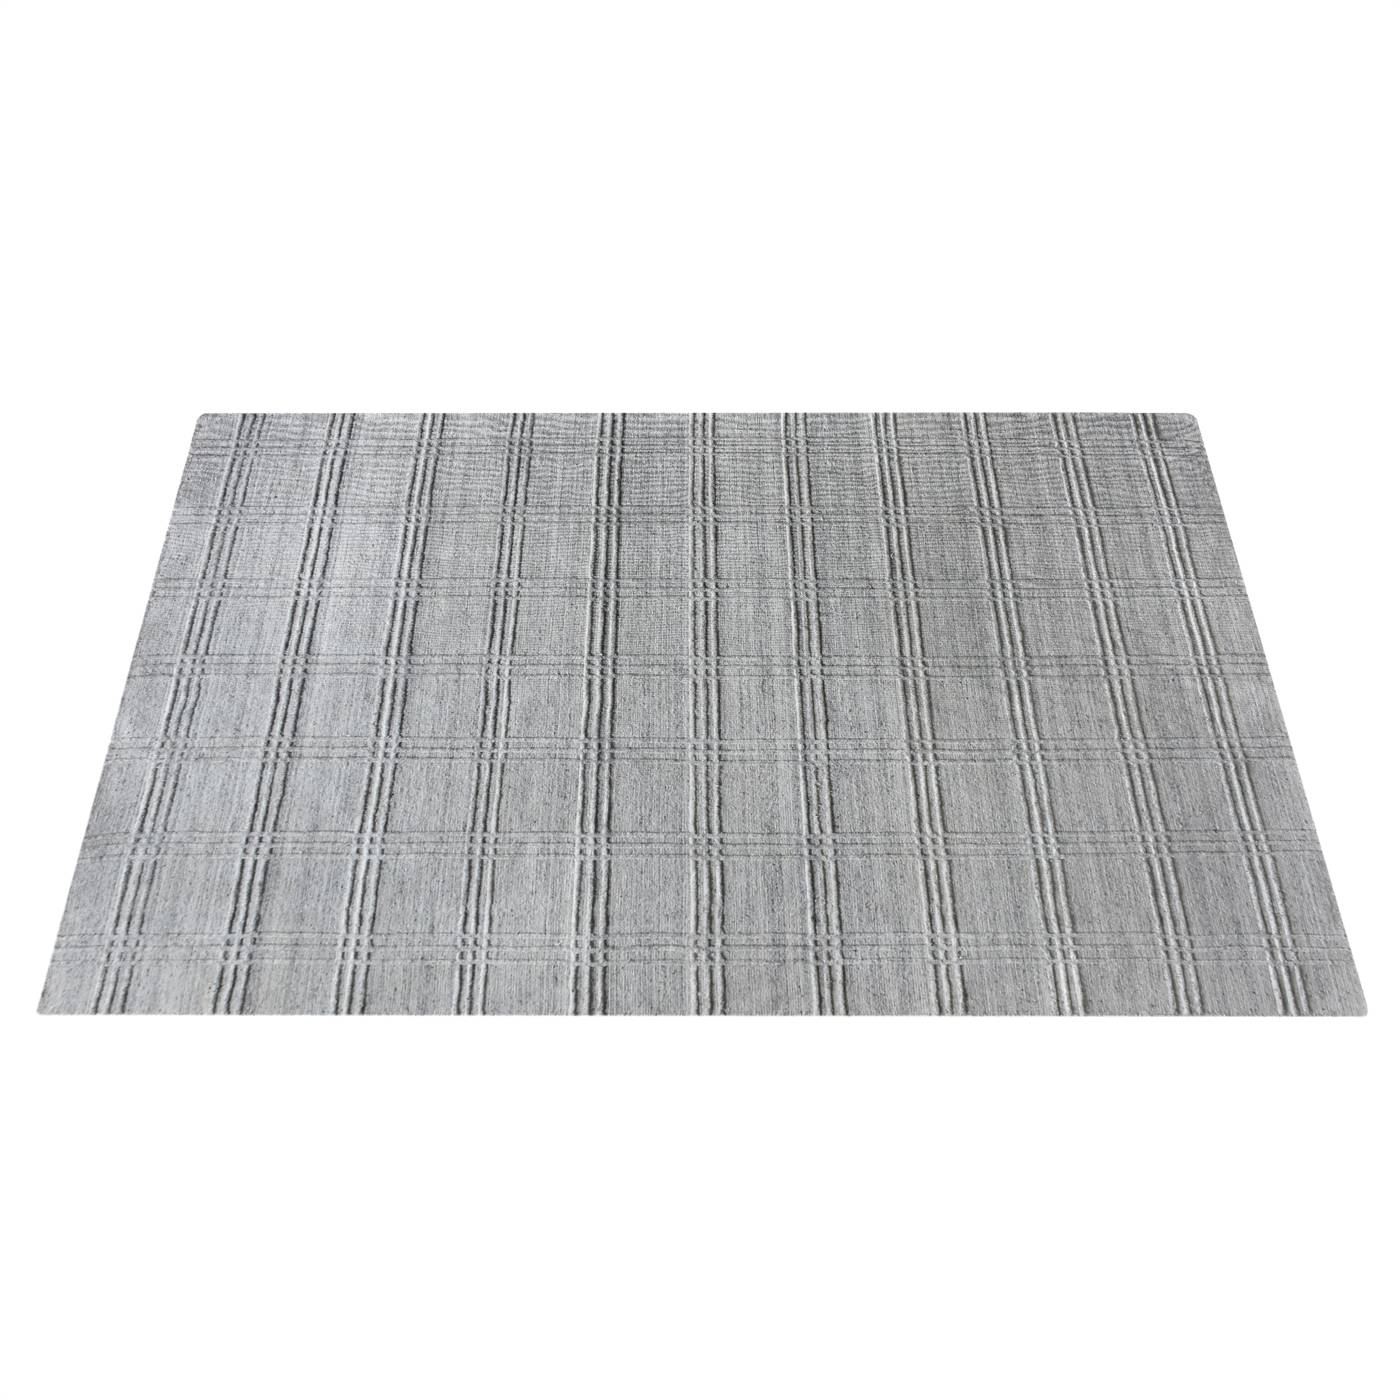 Area Rug, Bedroom Rug, Living Room Rug, Living Area Rug, Indian Rug, Office Carpet, Office Rug, Shop Rug Online, Grey, Pet, Hand Woven , Handwoven, All Cut, Contemporary 